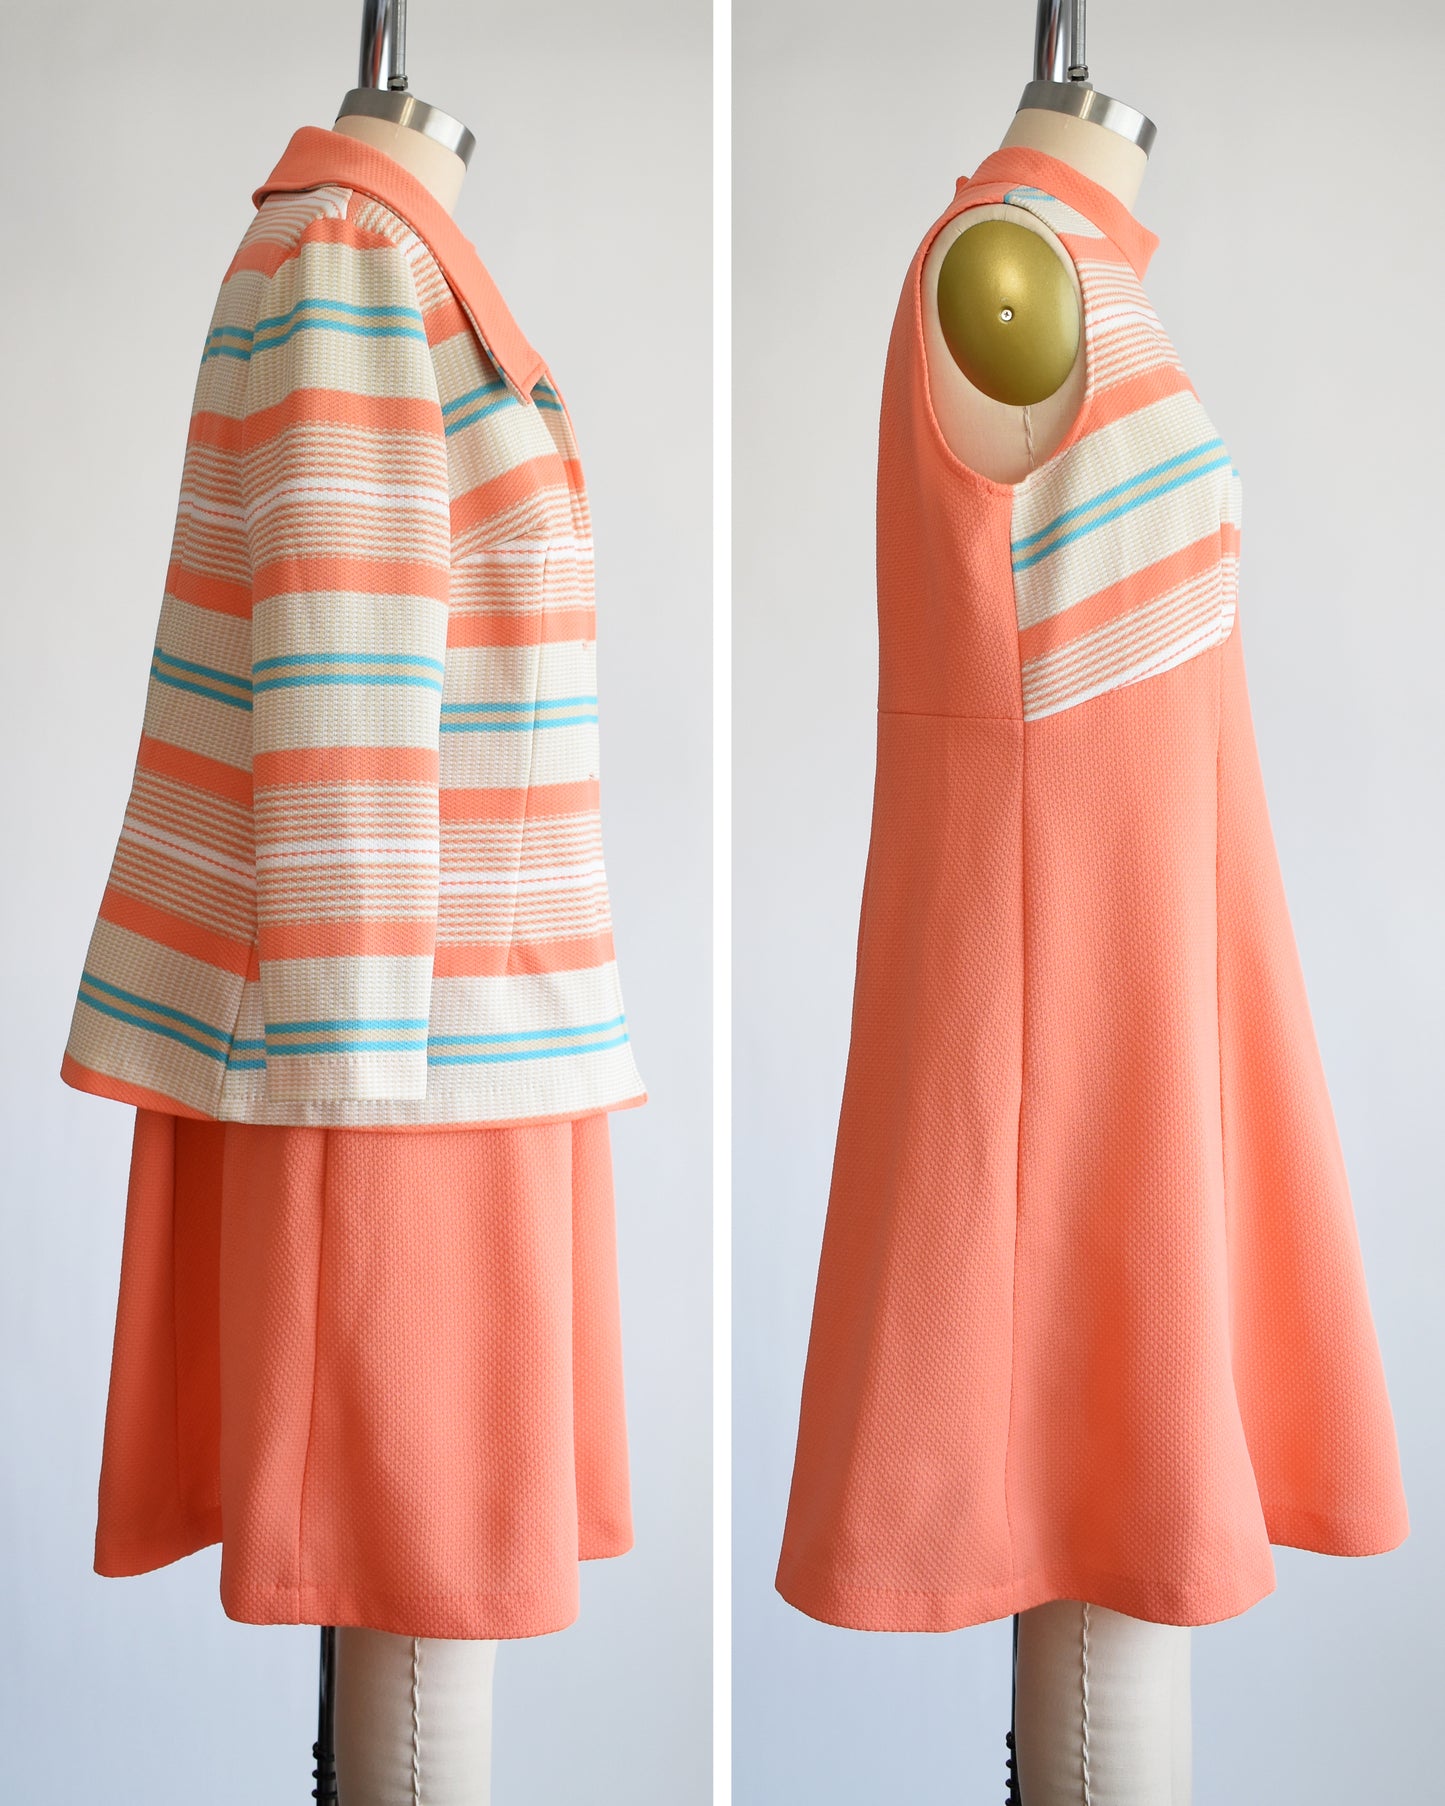 Side by side view of the side of a vintage 1970s peach and blue mod dress set. The left shows the set with the jacket and the right photo shows only the dress